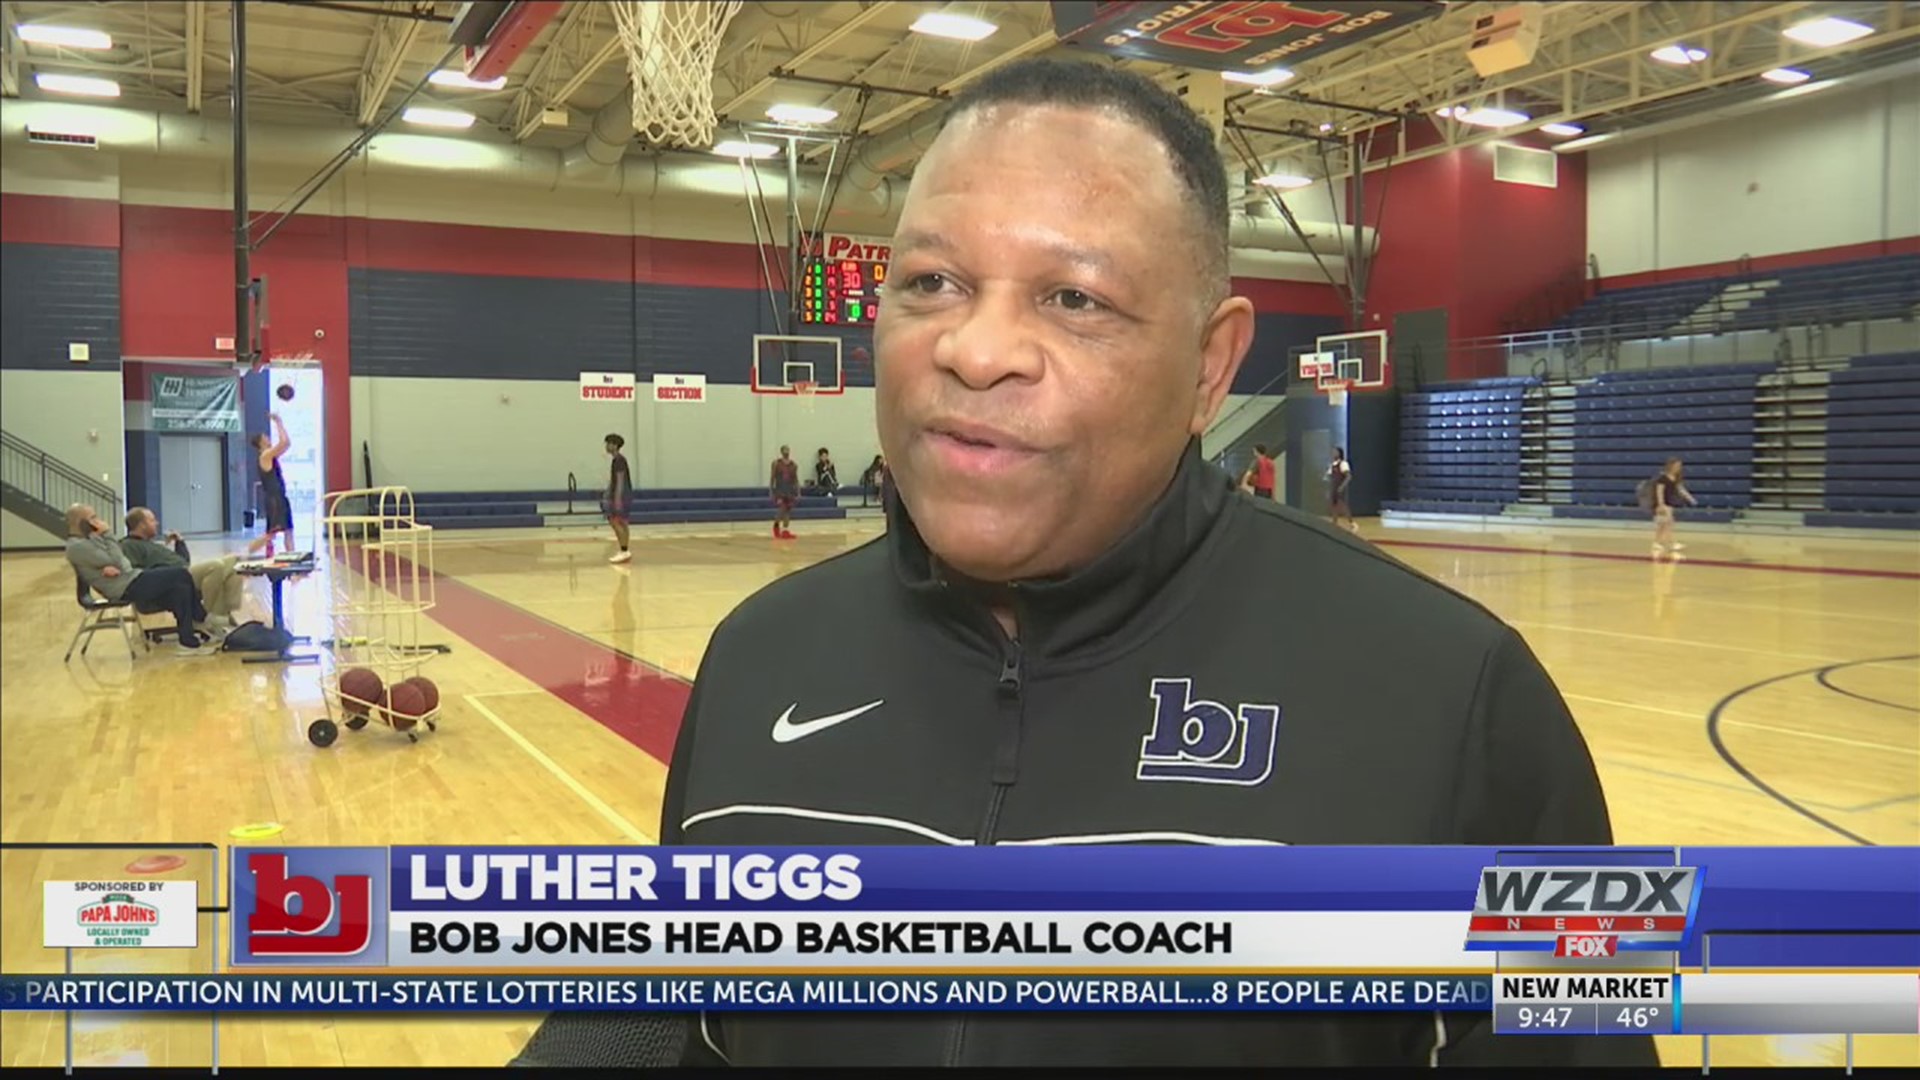 Things are quite different this year for the Bob Jones Patriots boys' basketball. They have 21 wins on the season and have consistently been in the top ten of class 7A polls. Head coach Luther Tiggs says they're just getting started.